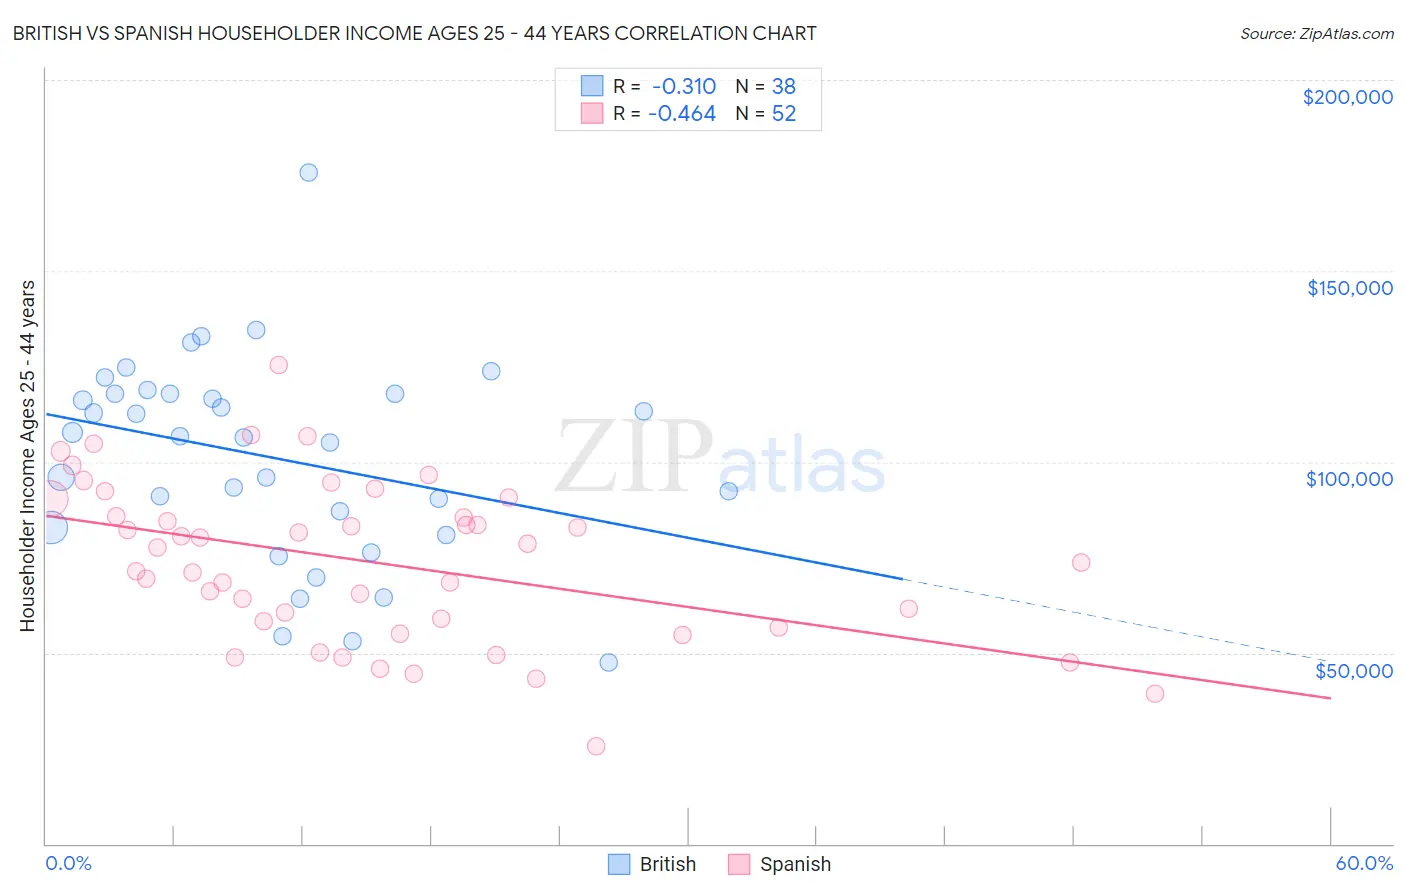 British vs Spanish Householder Income Ages 25 - 44 years